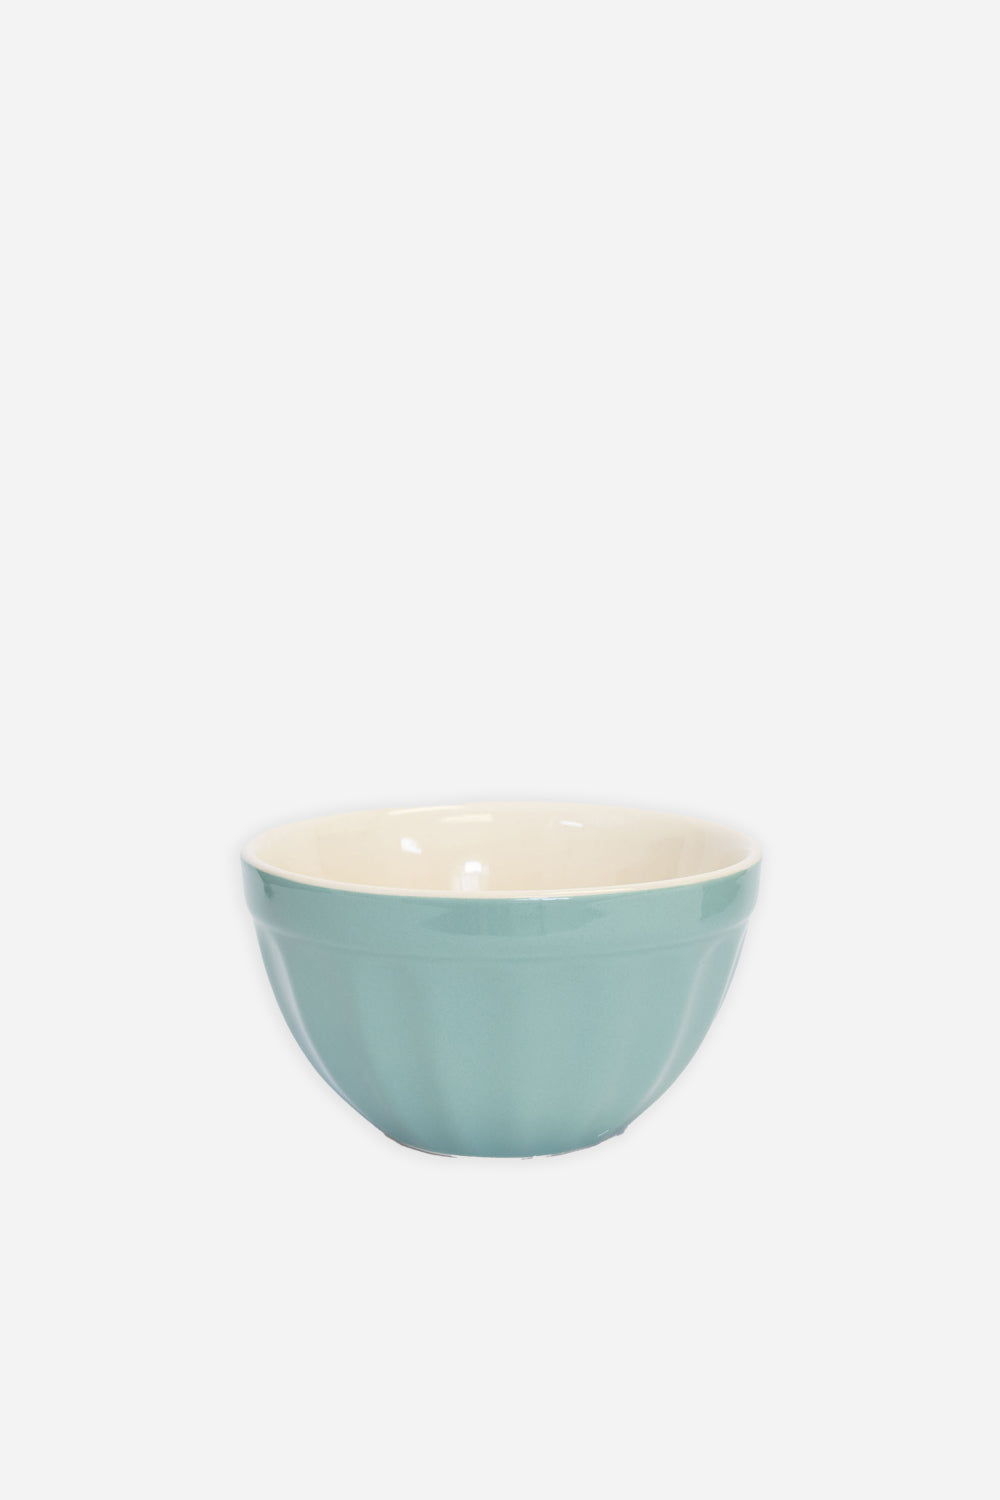 green stoneware cereal breakfast bowl